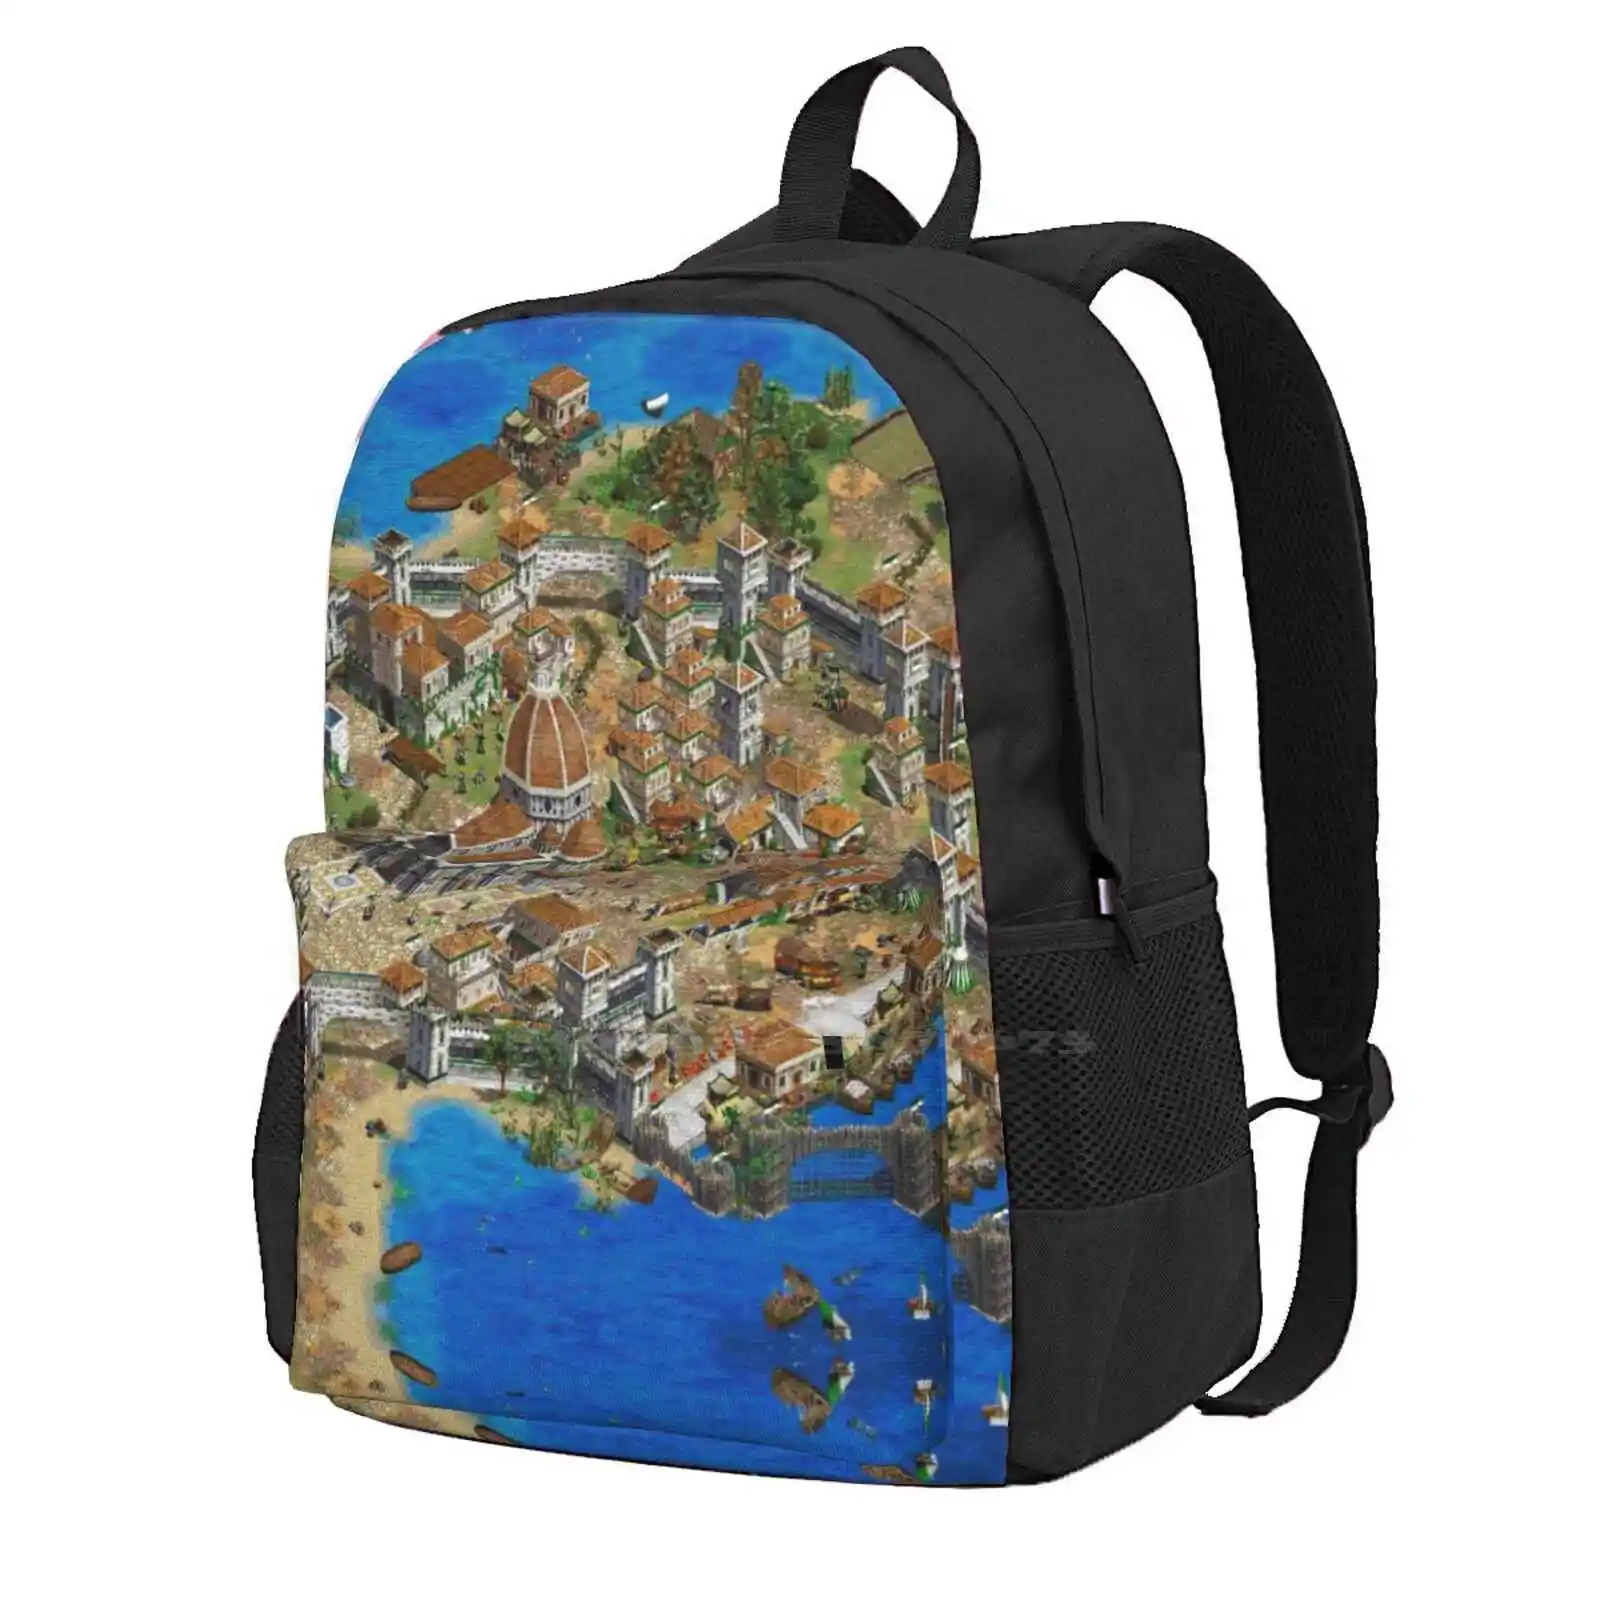 

Age Of Empires 2 Hd Screenshot Hot Sale Backpack Fashion Bags Age Of Empires 2 Rts Aoe2 High Definition Video Game Real Time